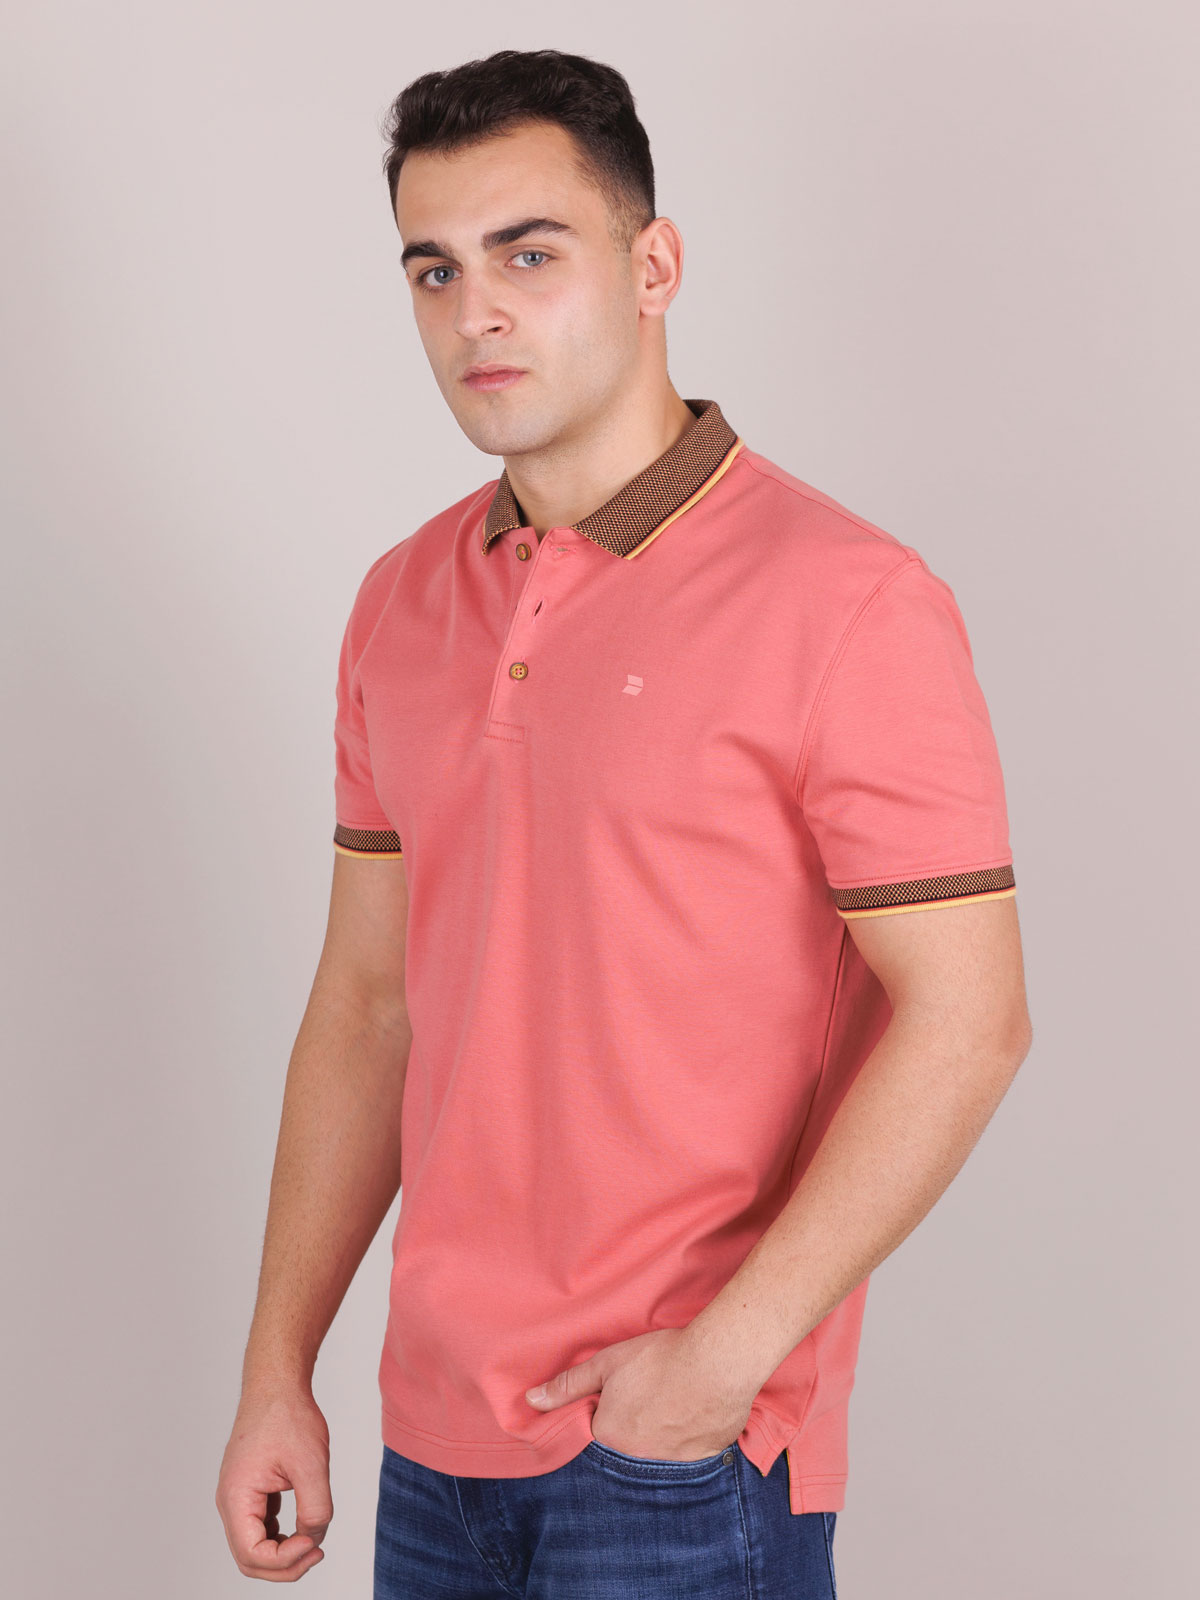 Blouse with short sleeves in coral color - 94411 € 30.93 img2